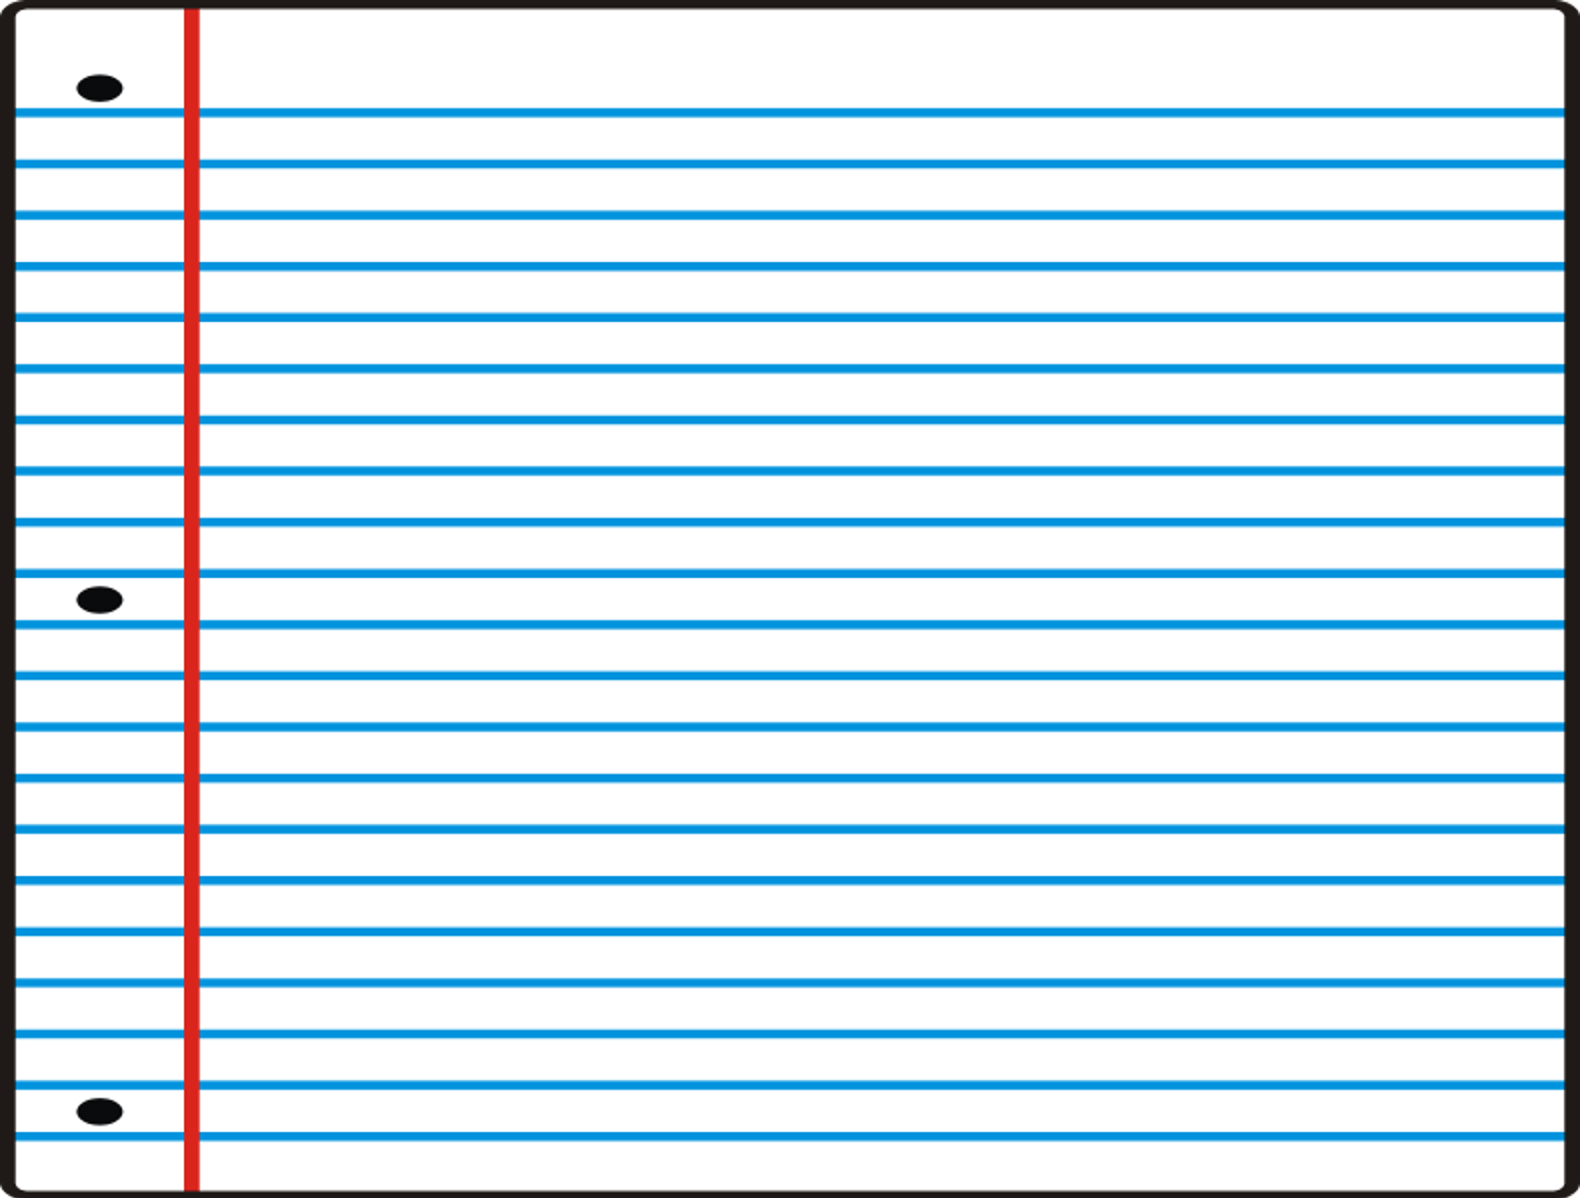 notepad clipart lined